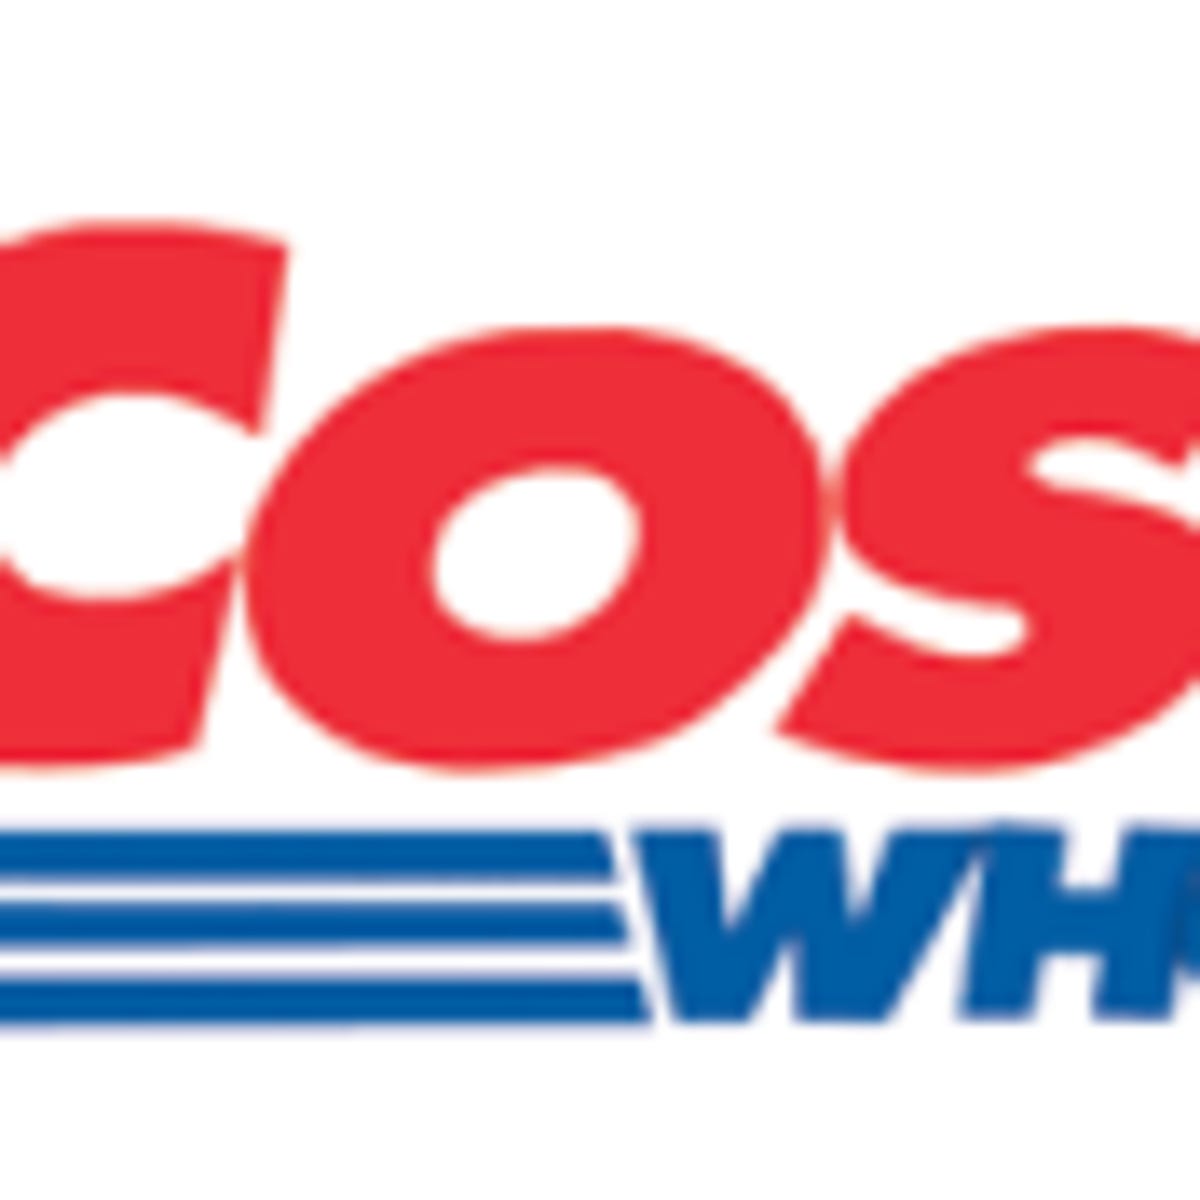 Costco confirms it will stop selling Apple products - CNET